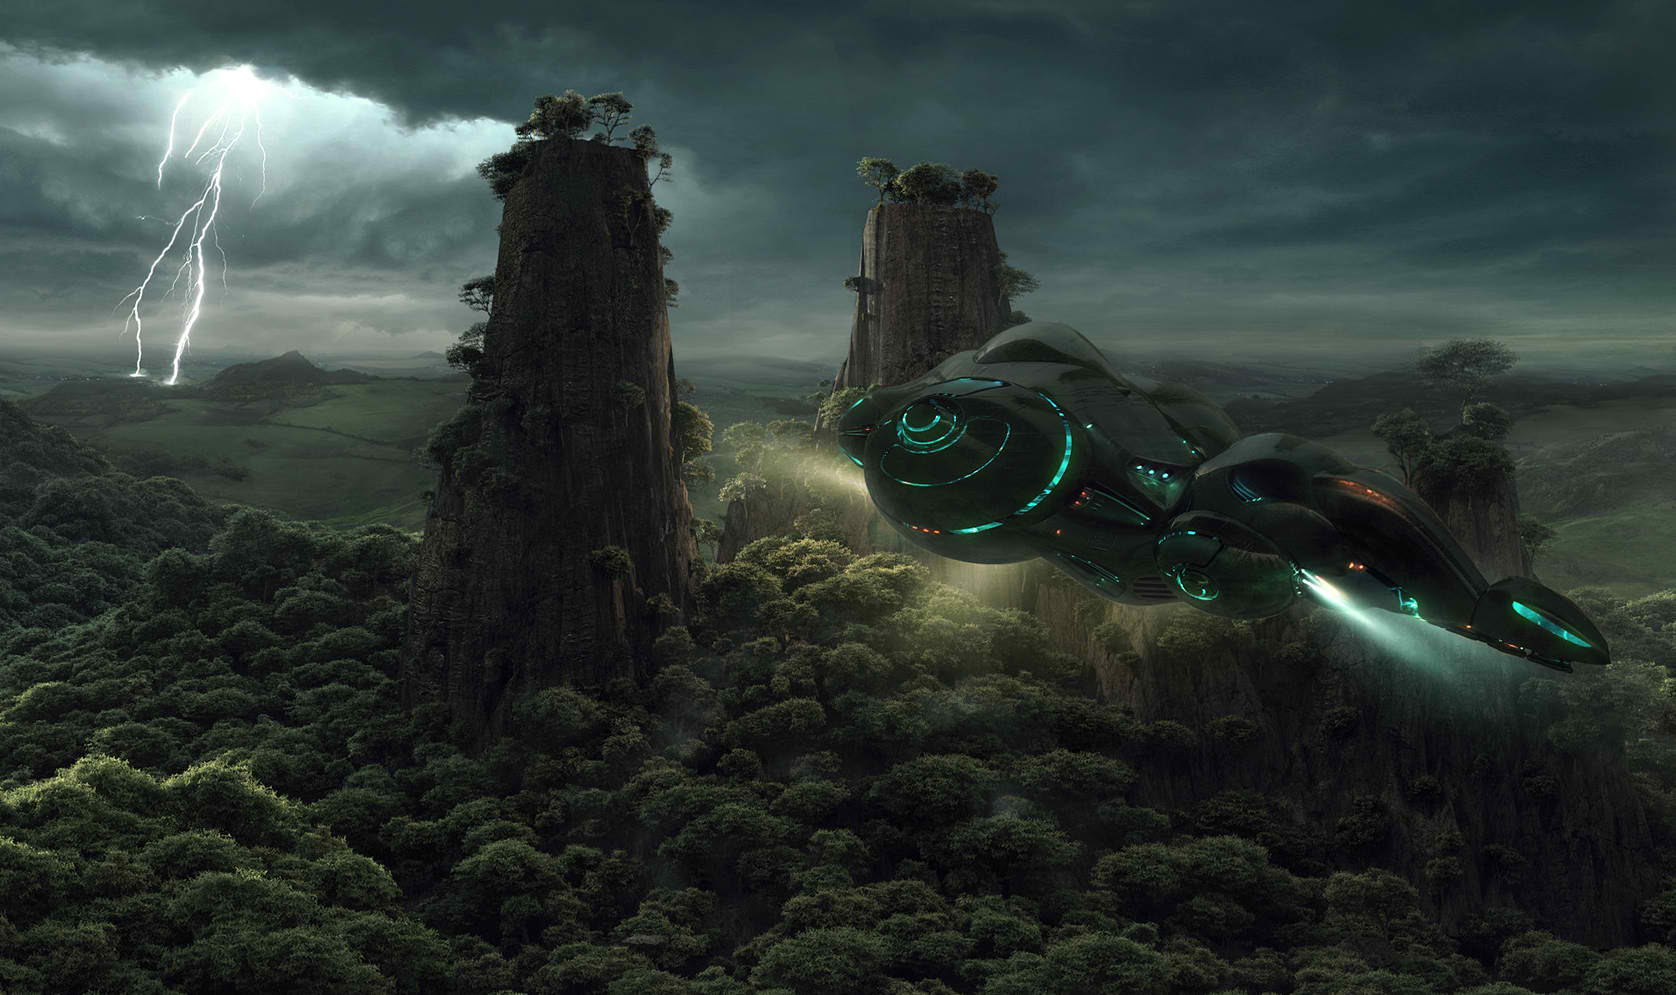 Wonderful Sci Fi Wallpaper From Out Of World. Tutoriallounge